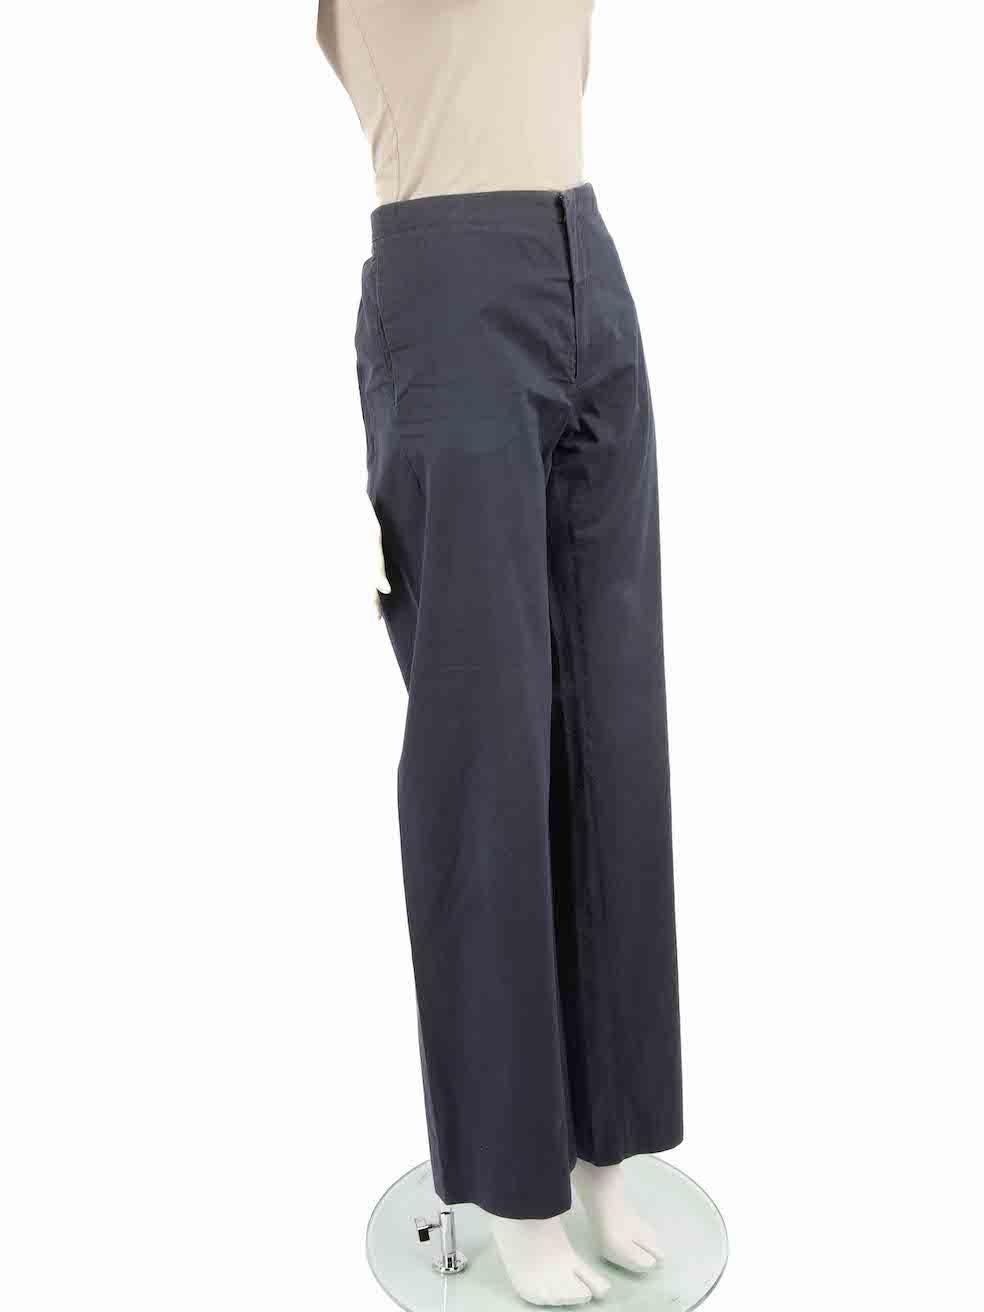 CONDITION is Very good. Minimal wear to trousers is evident. Minimal wear to the waistband with light fading on this used Marni designer resale item.
 
 Details
 S/S 13
 Navy
 Cotton
 Straight leg trousers
 Mid rise
 Front zip closure with button
